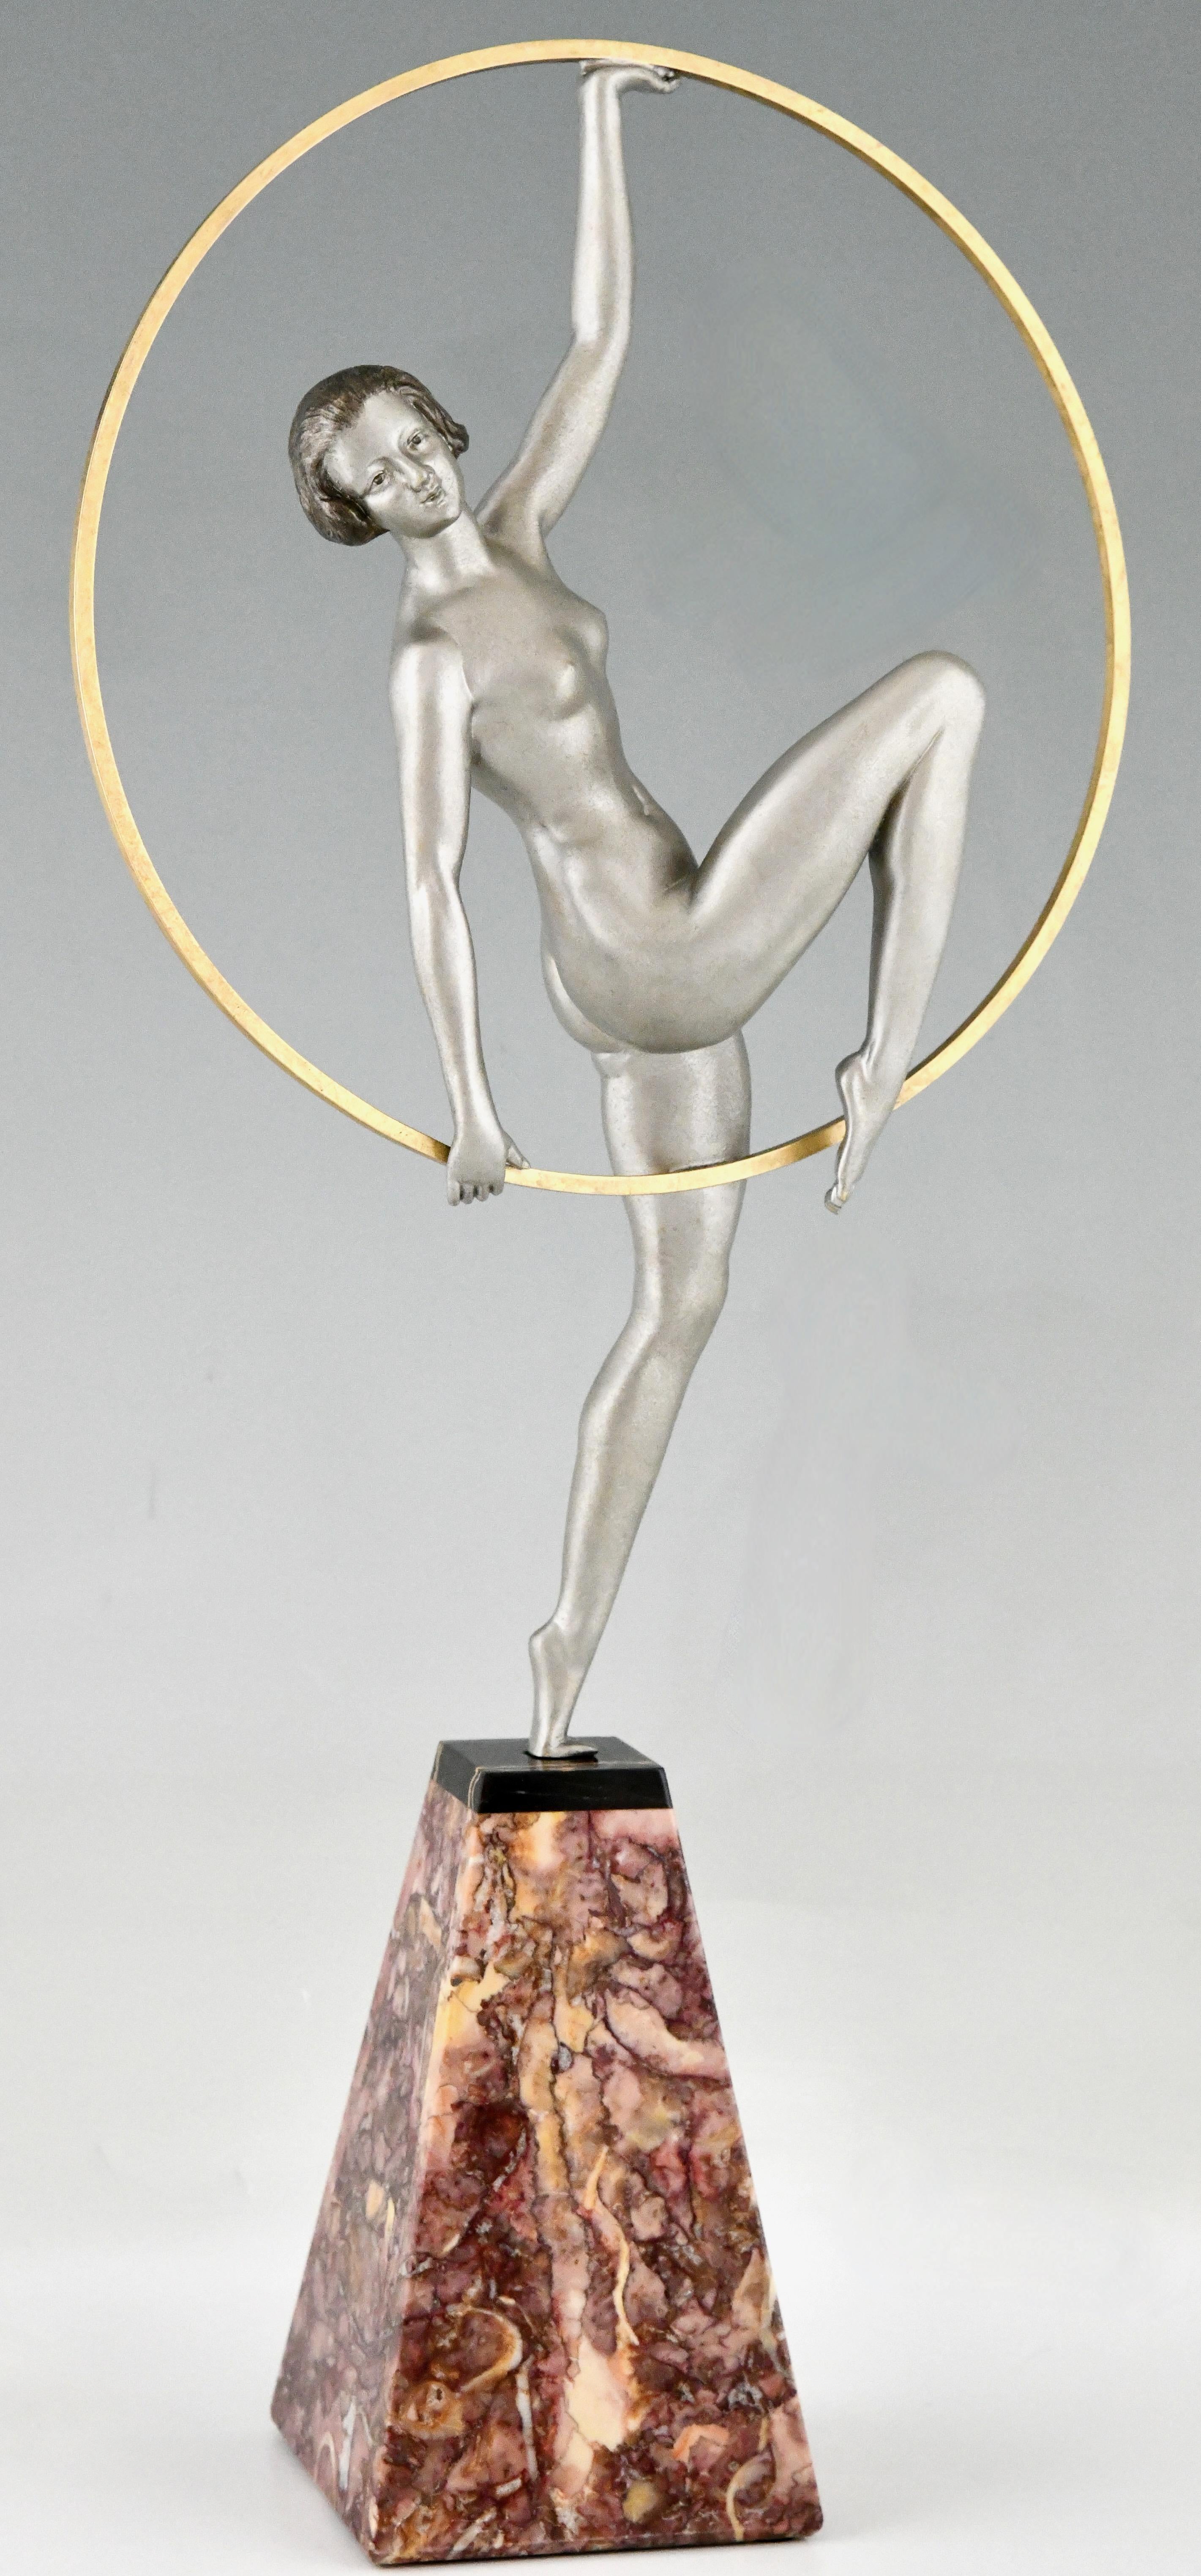 French Art Deco sculpture hoop dancer by Limousin France 1930 For Sale